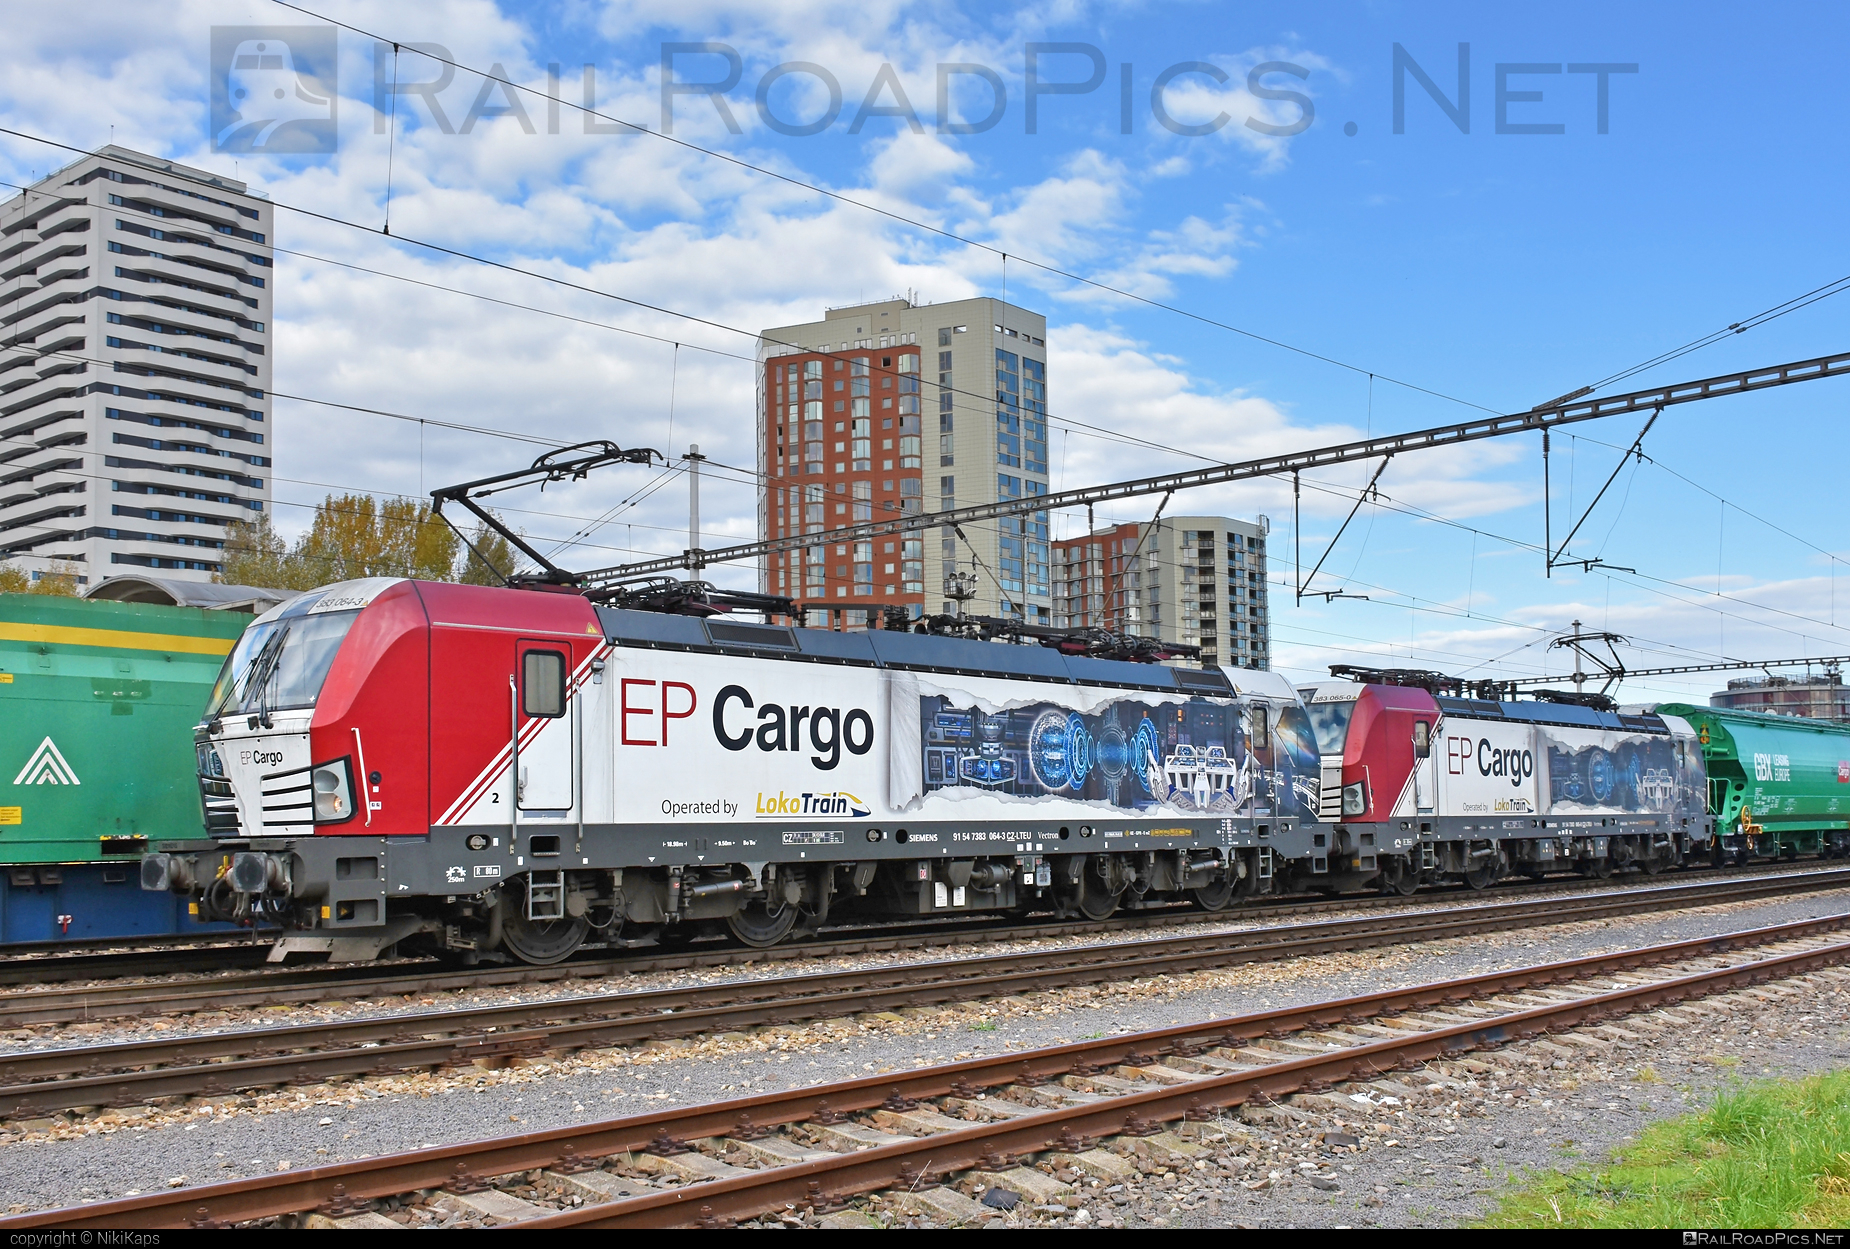 Siemens Vectron MS - 383 064-3 operated by EP Cargo a.s. #epcargo #epci #lokotrain #lokotrainsro #siemens #siemensVectron #siemensVectronMS #vectron #vectronMS